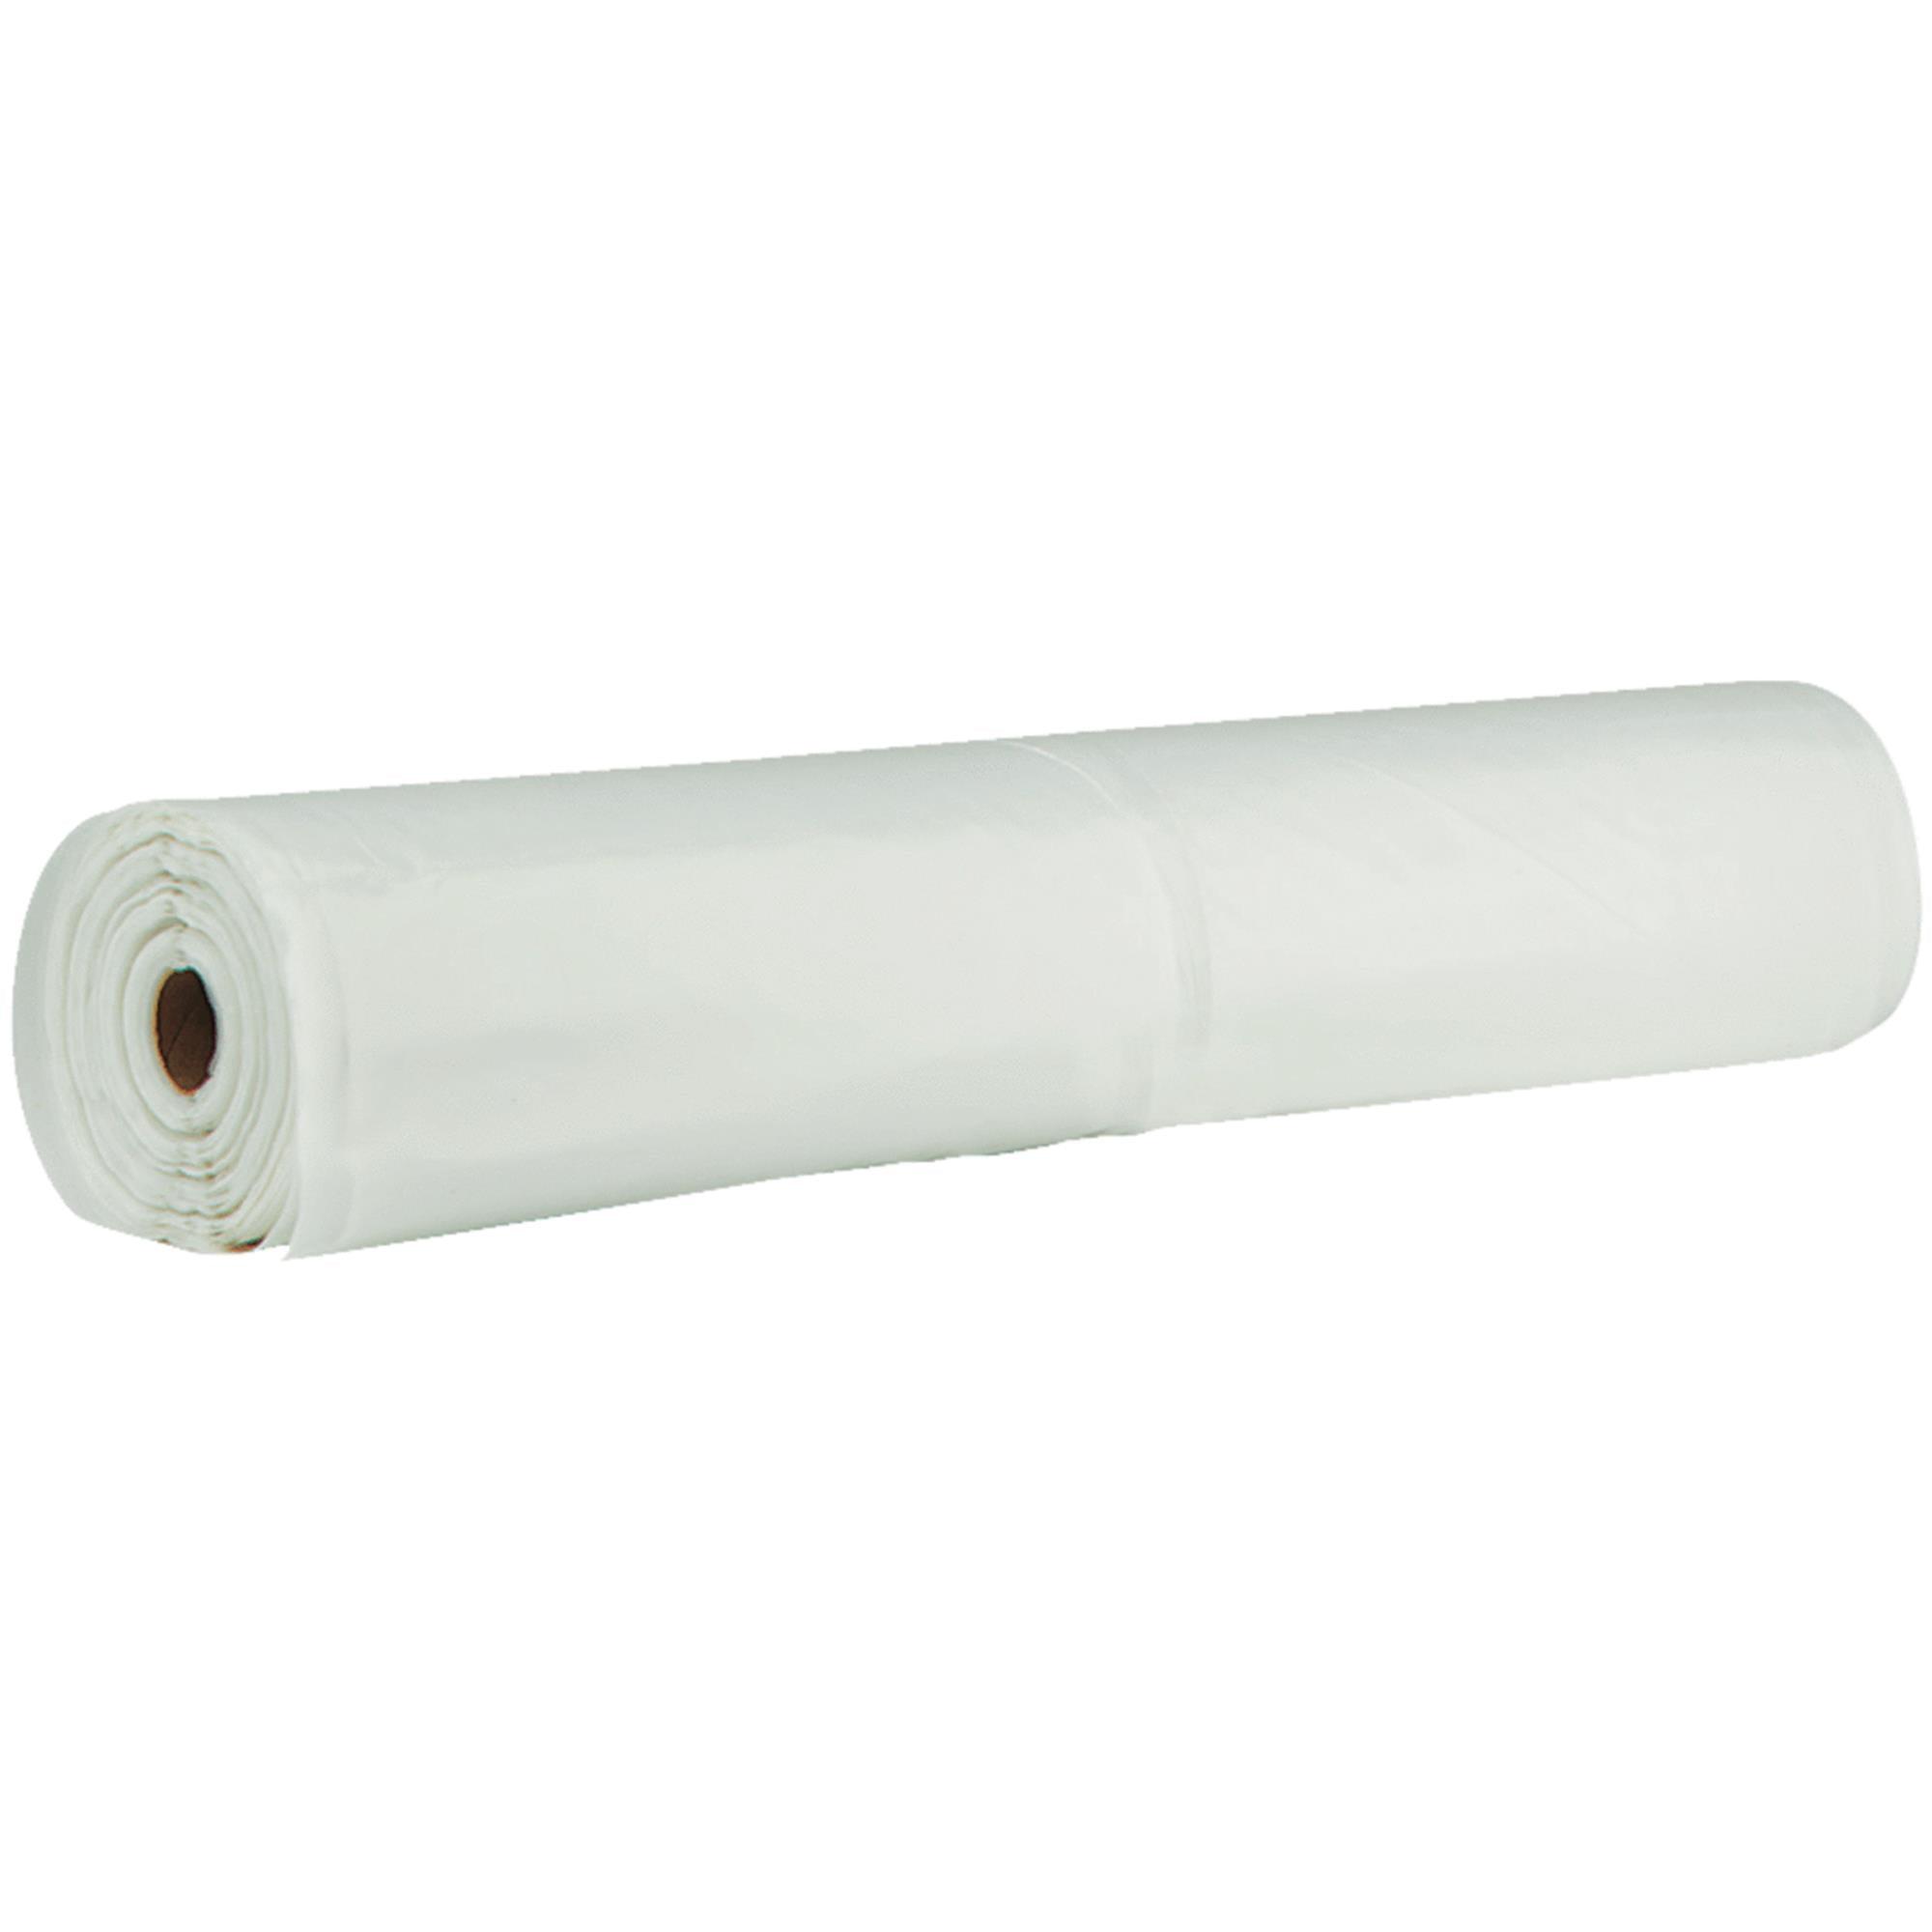 12' x 50' Clear Construction Plastic Sheeting, 4 mil or 6 mil LDPE Film  Rolls, 600 sq. ft. Area buy in stock in U.S. in IDL Packaging